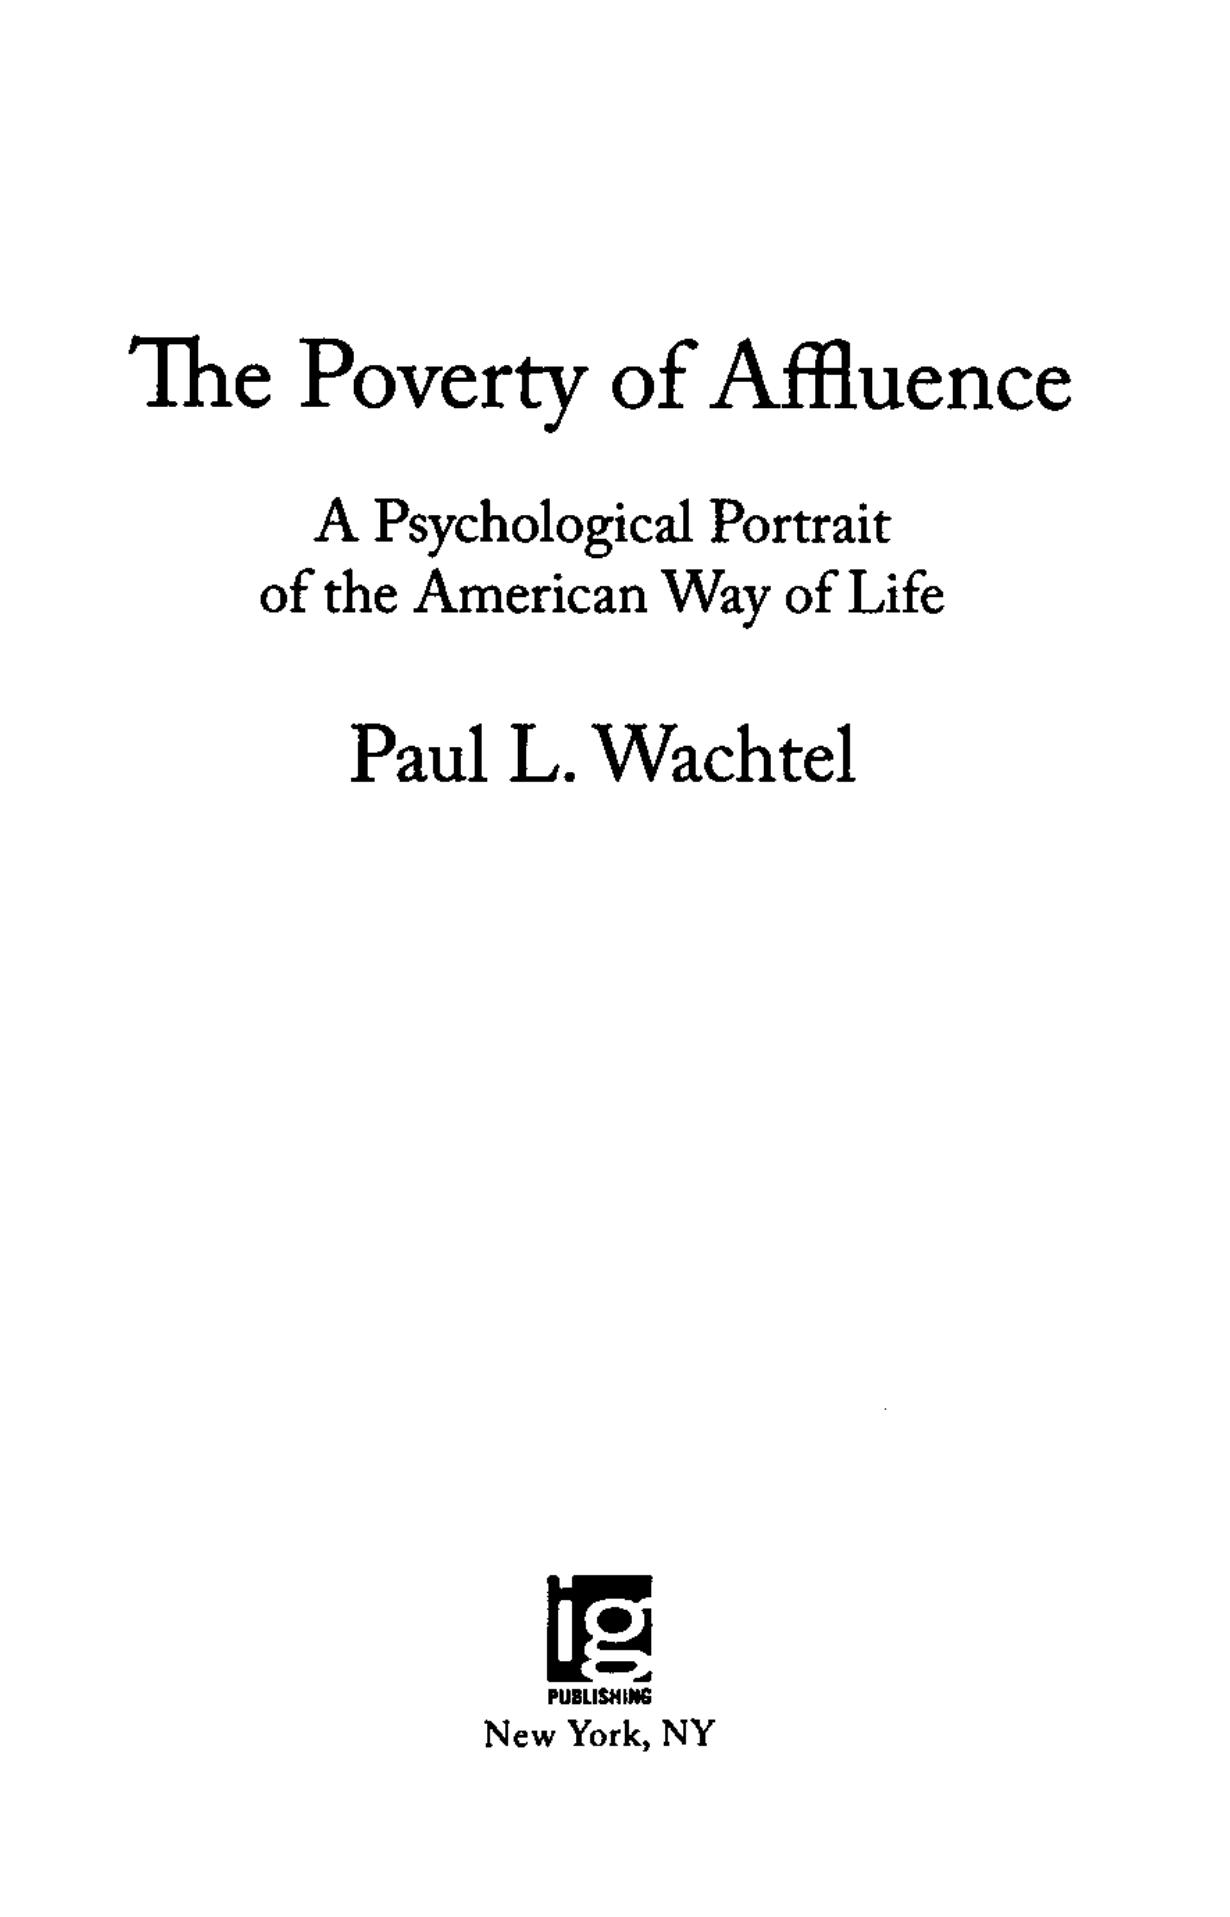 The Poverty of Affluence: A Psychological Portrait of the American Way of Life by Paul L. Wachtel